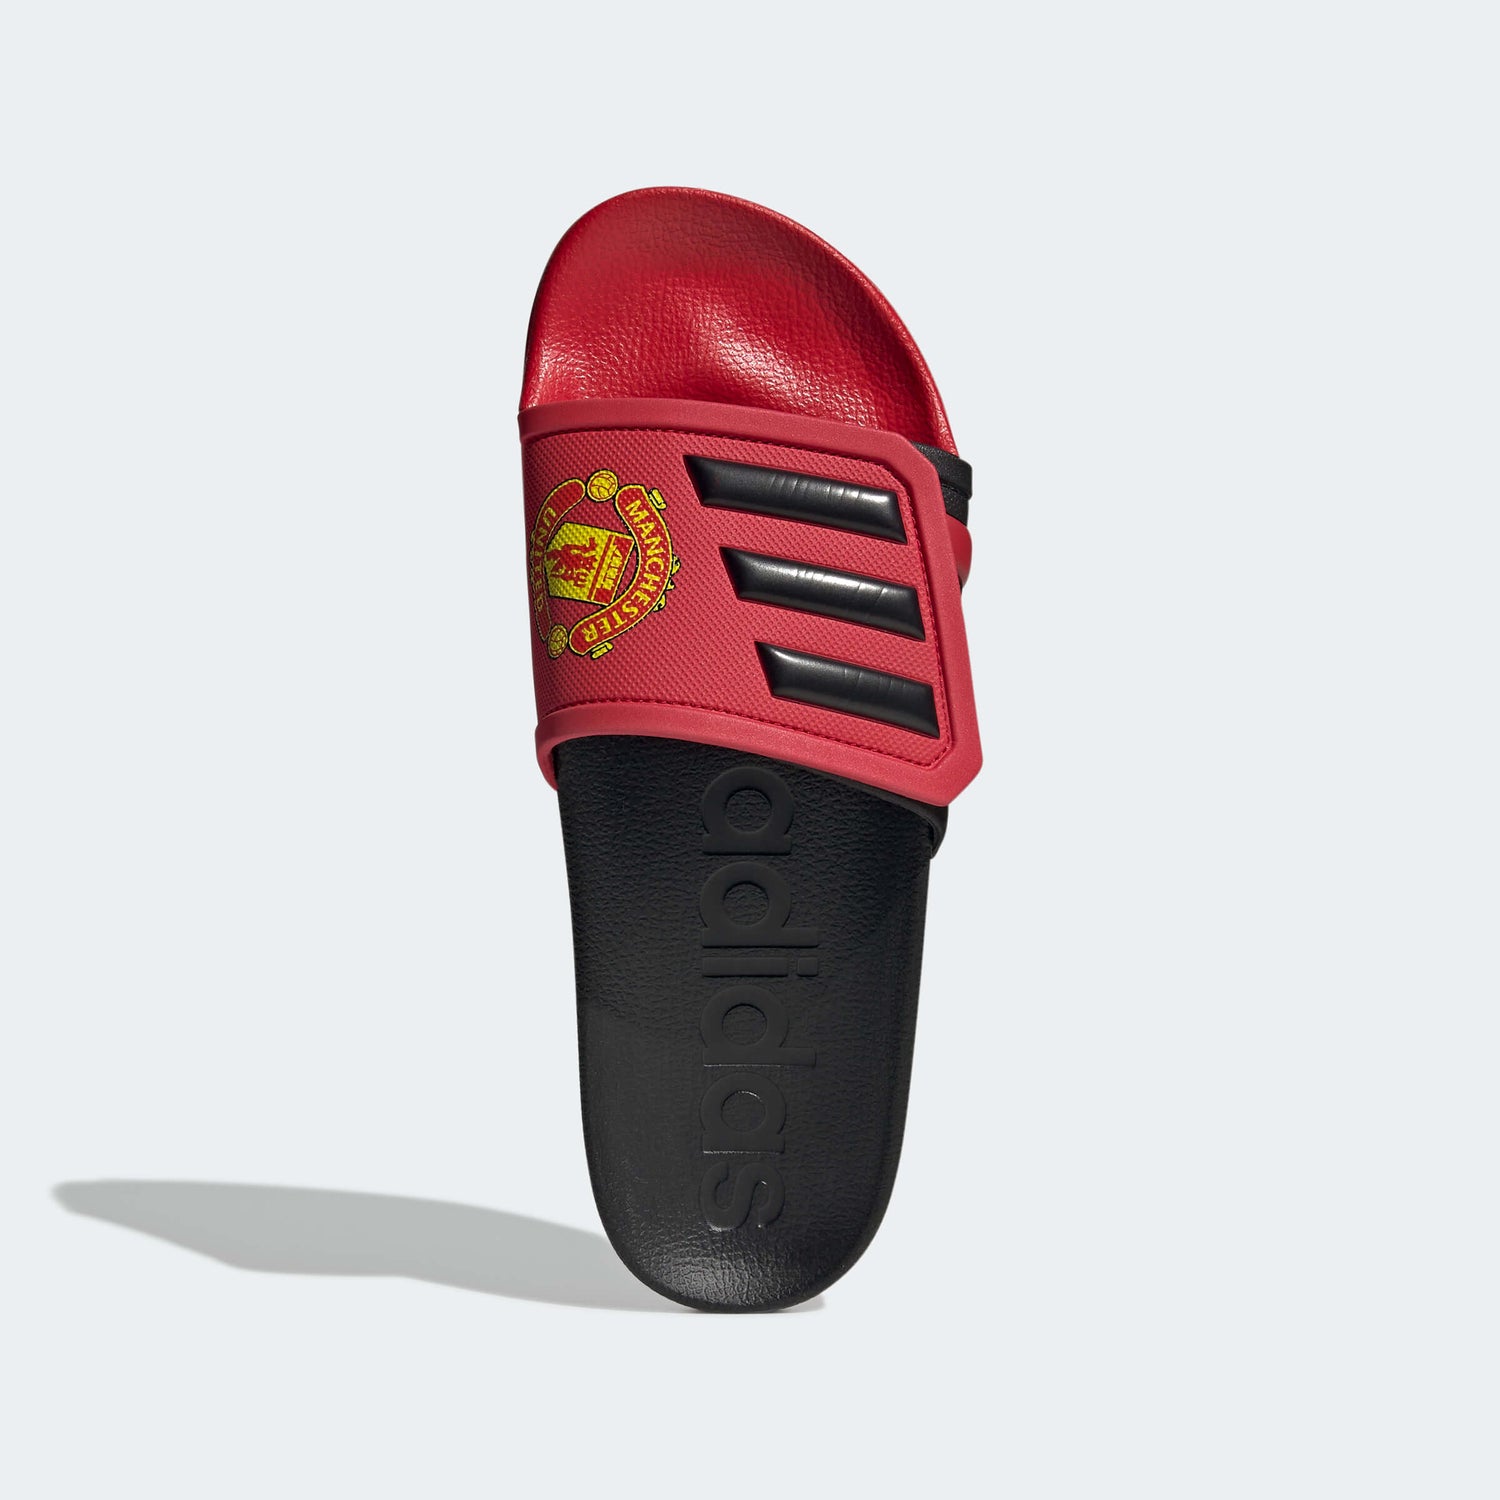 adidas Manchester United Adilette TND - Red-Black (Top)